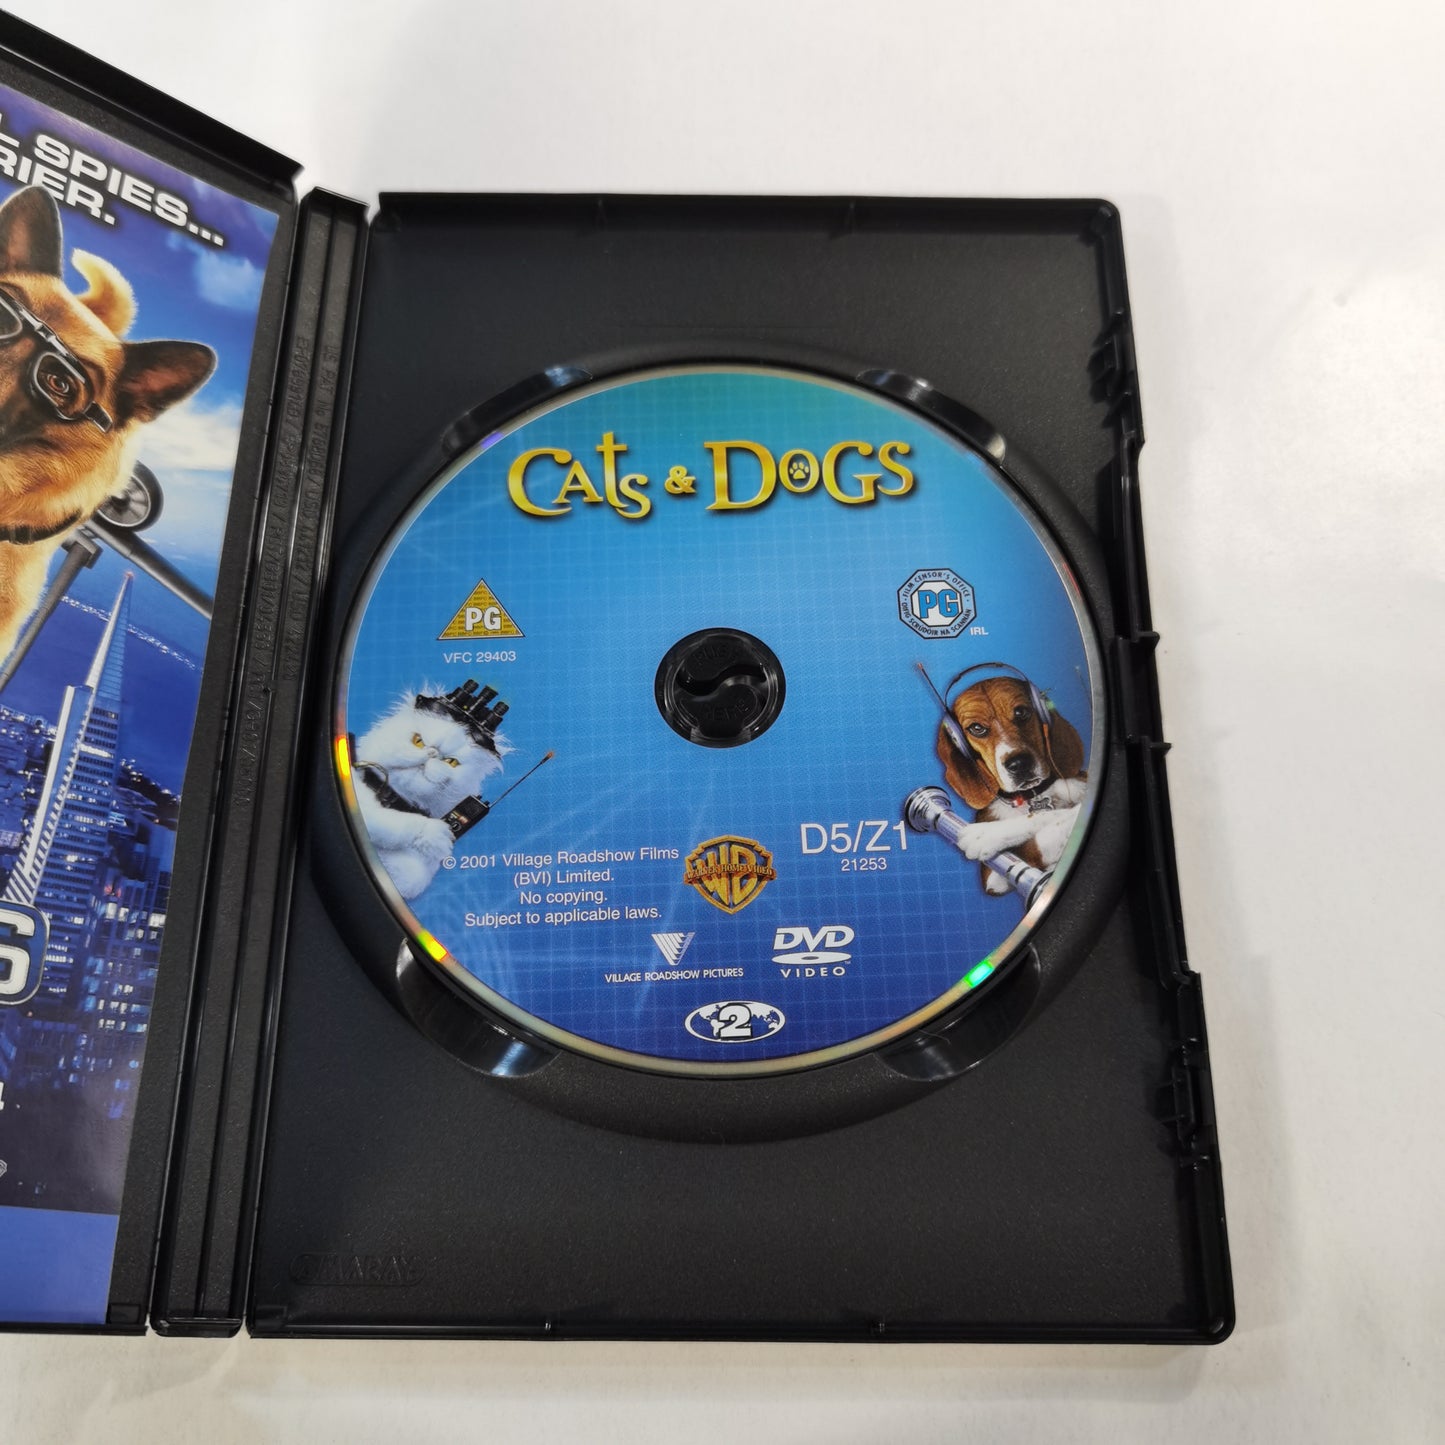 Cats & Dogs (2001) - DVD UK 2008